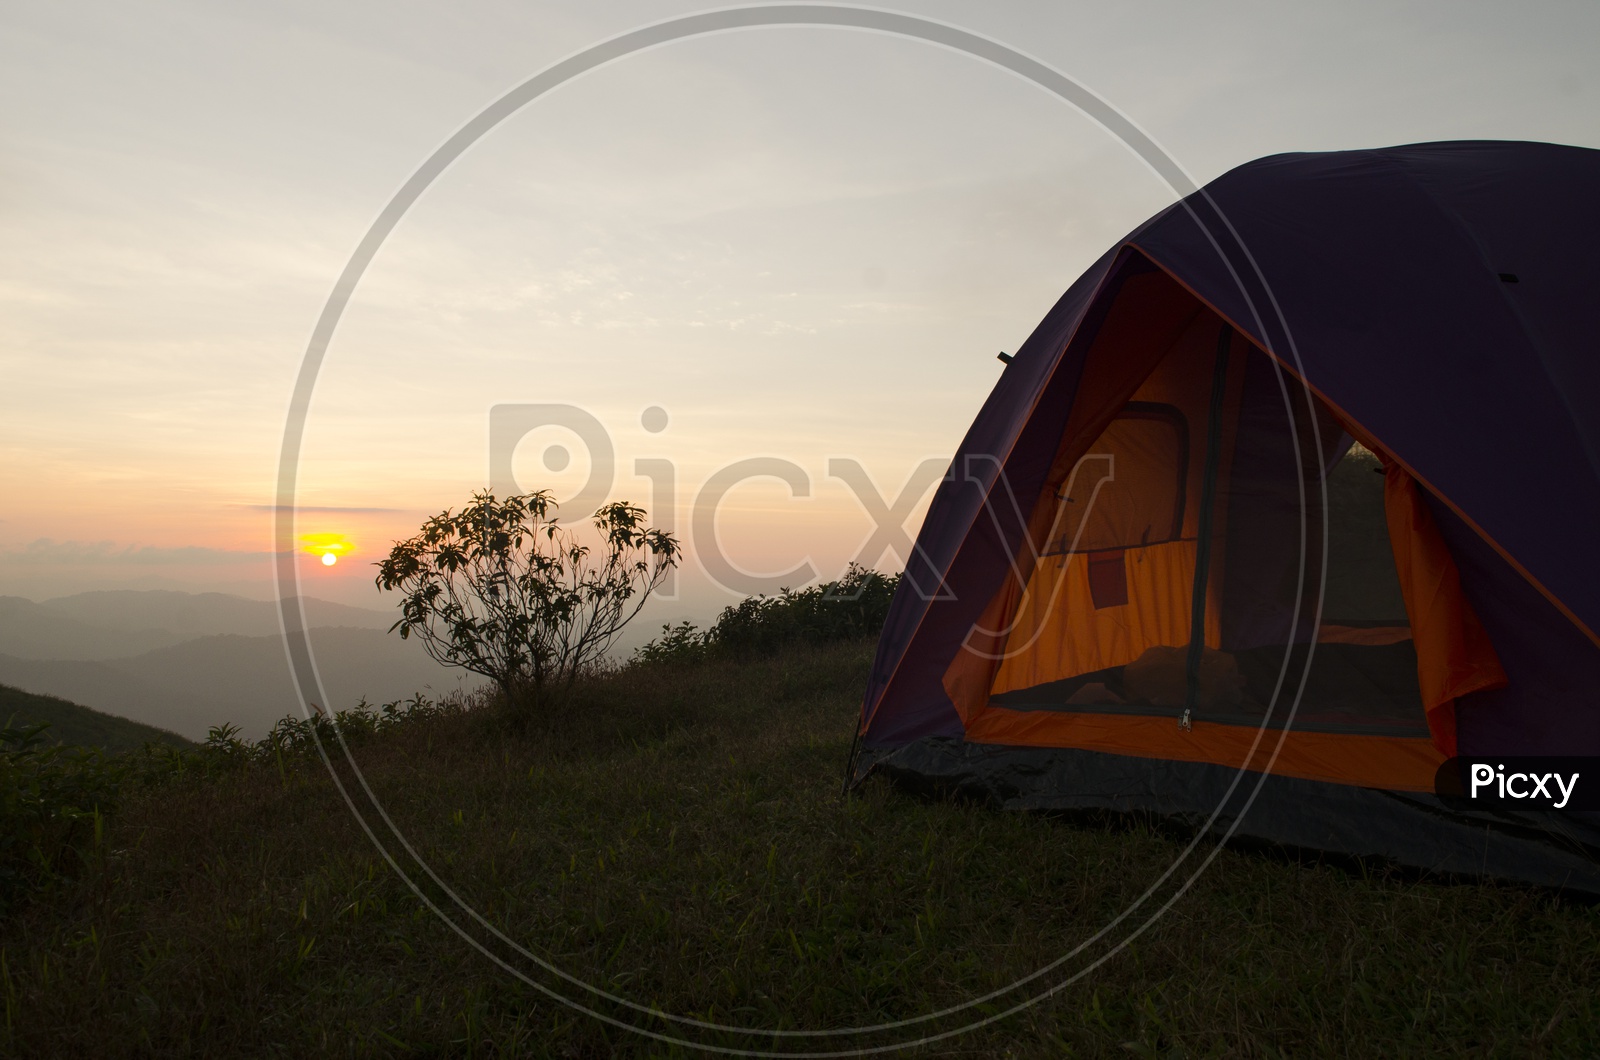 A Tent near Thailand canyon during sunset